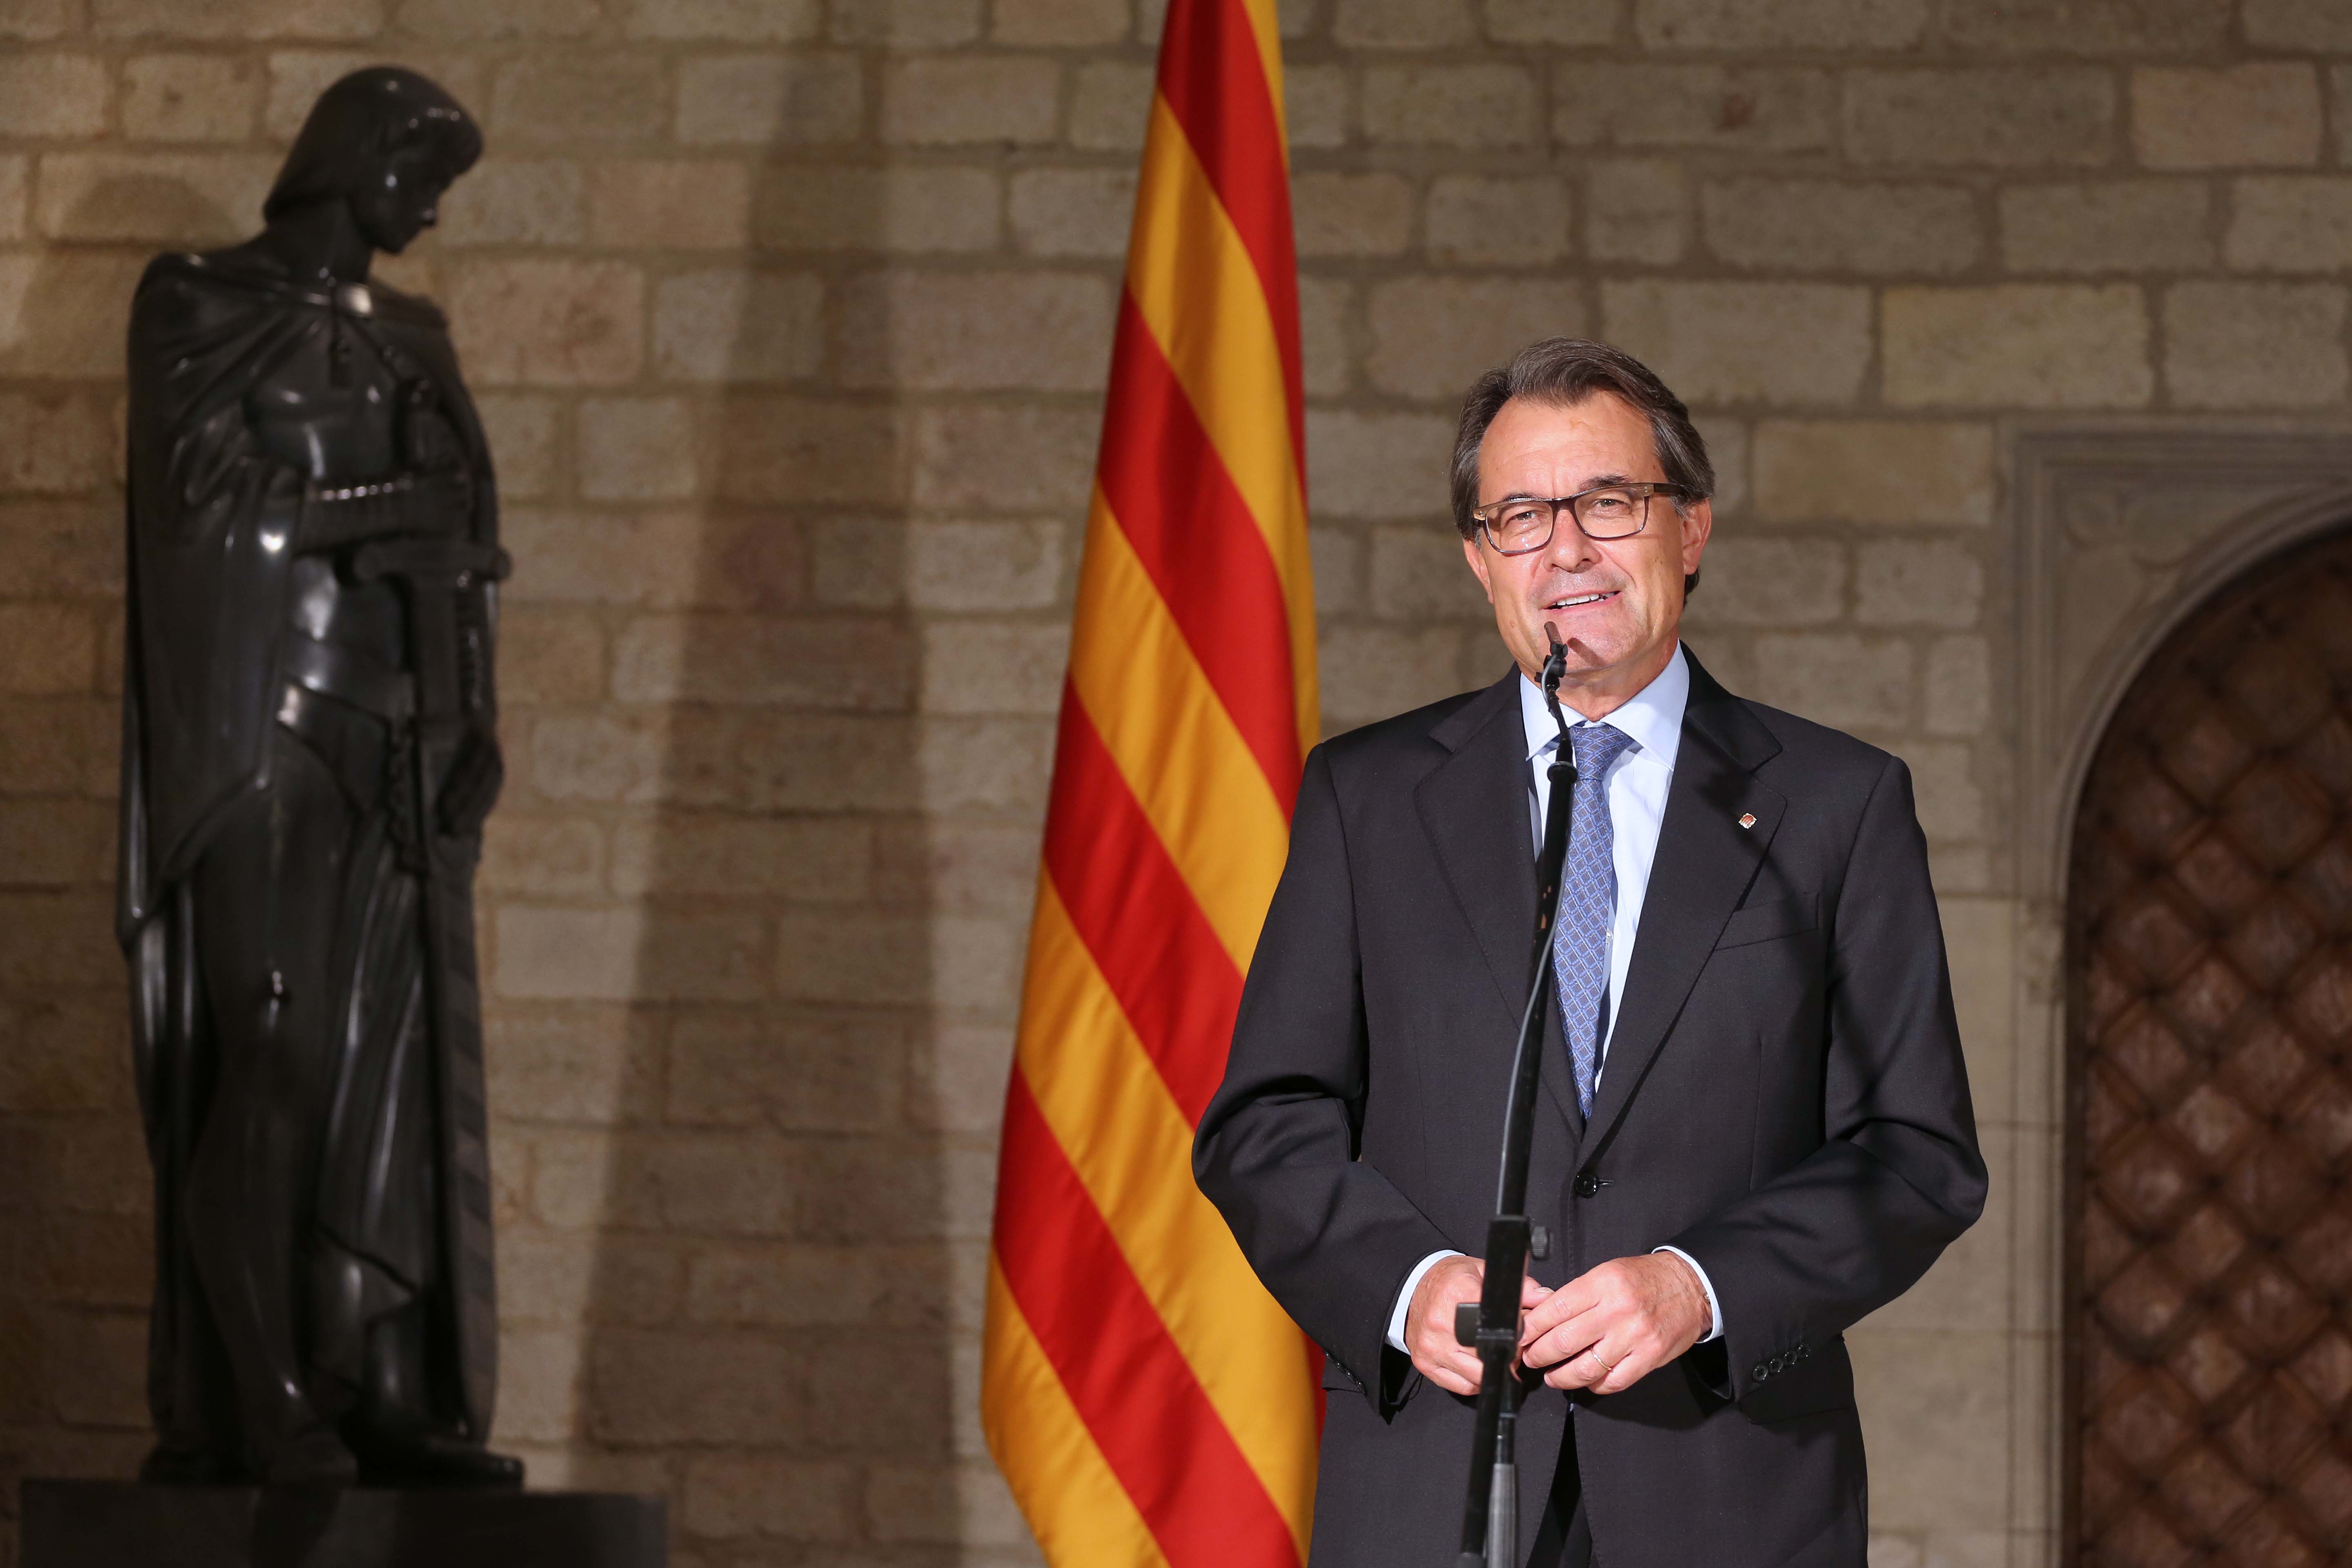 Catalan President Artur Mas during his speech (by ACN)